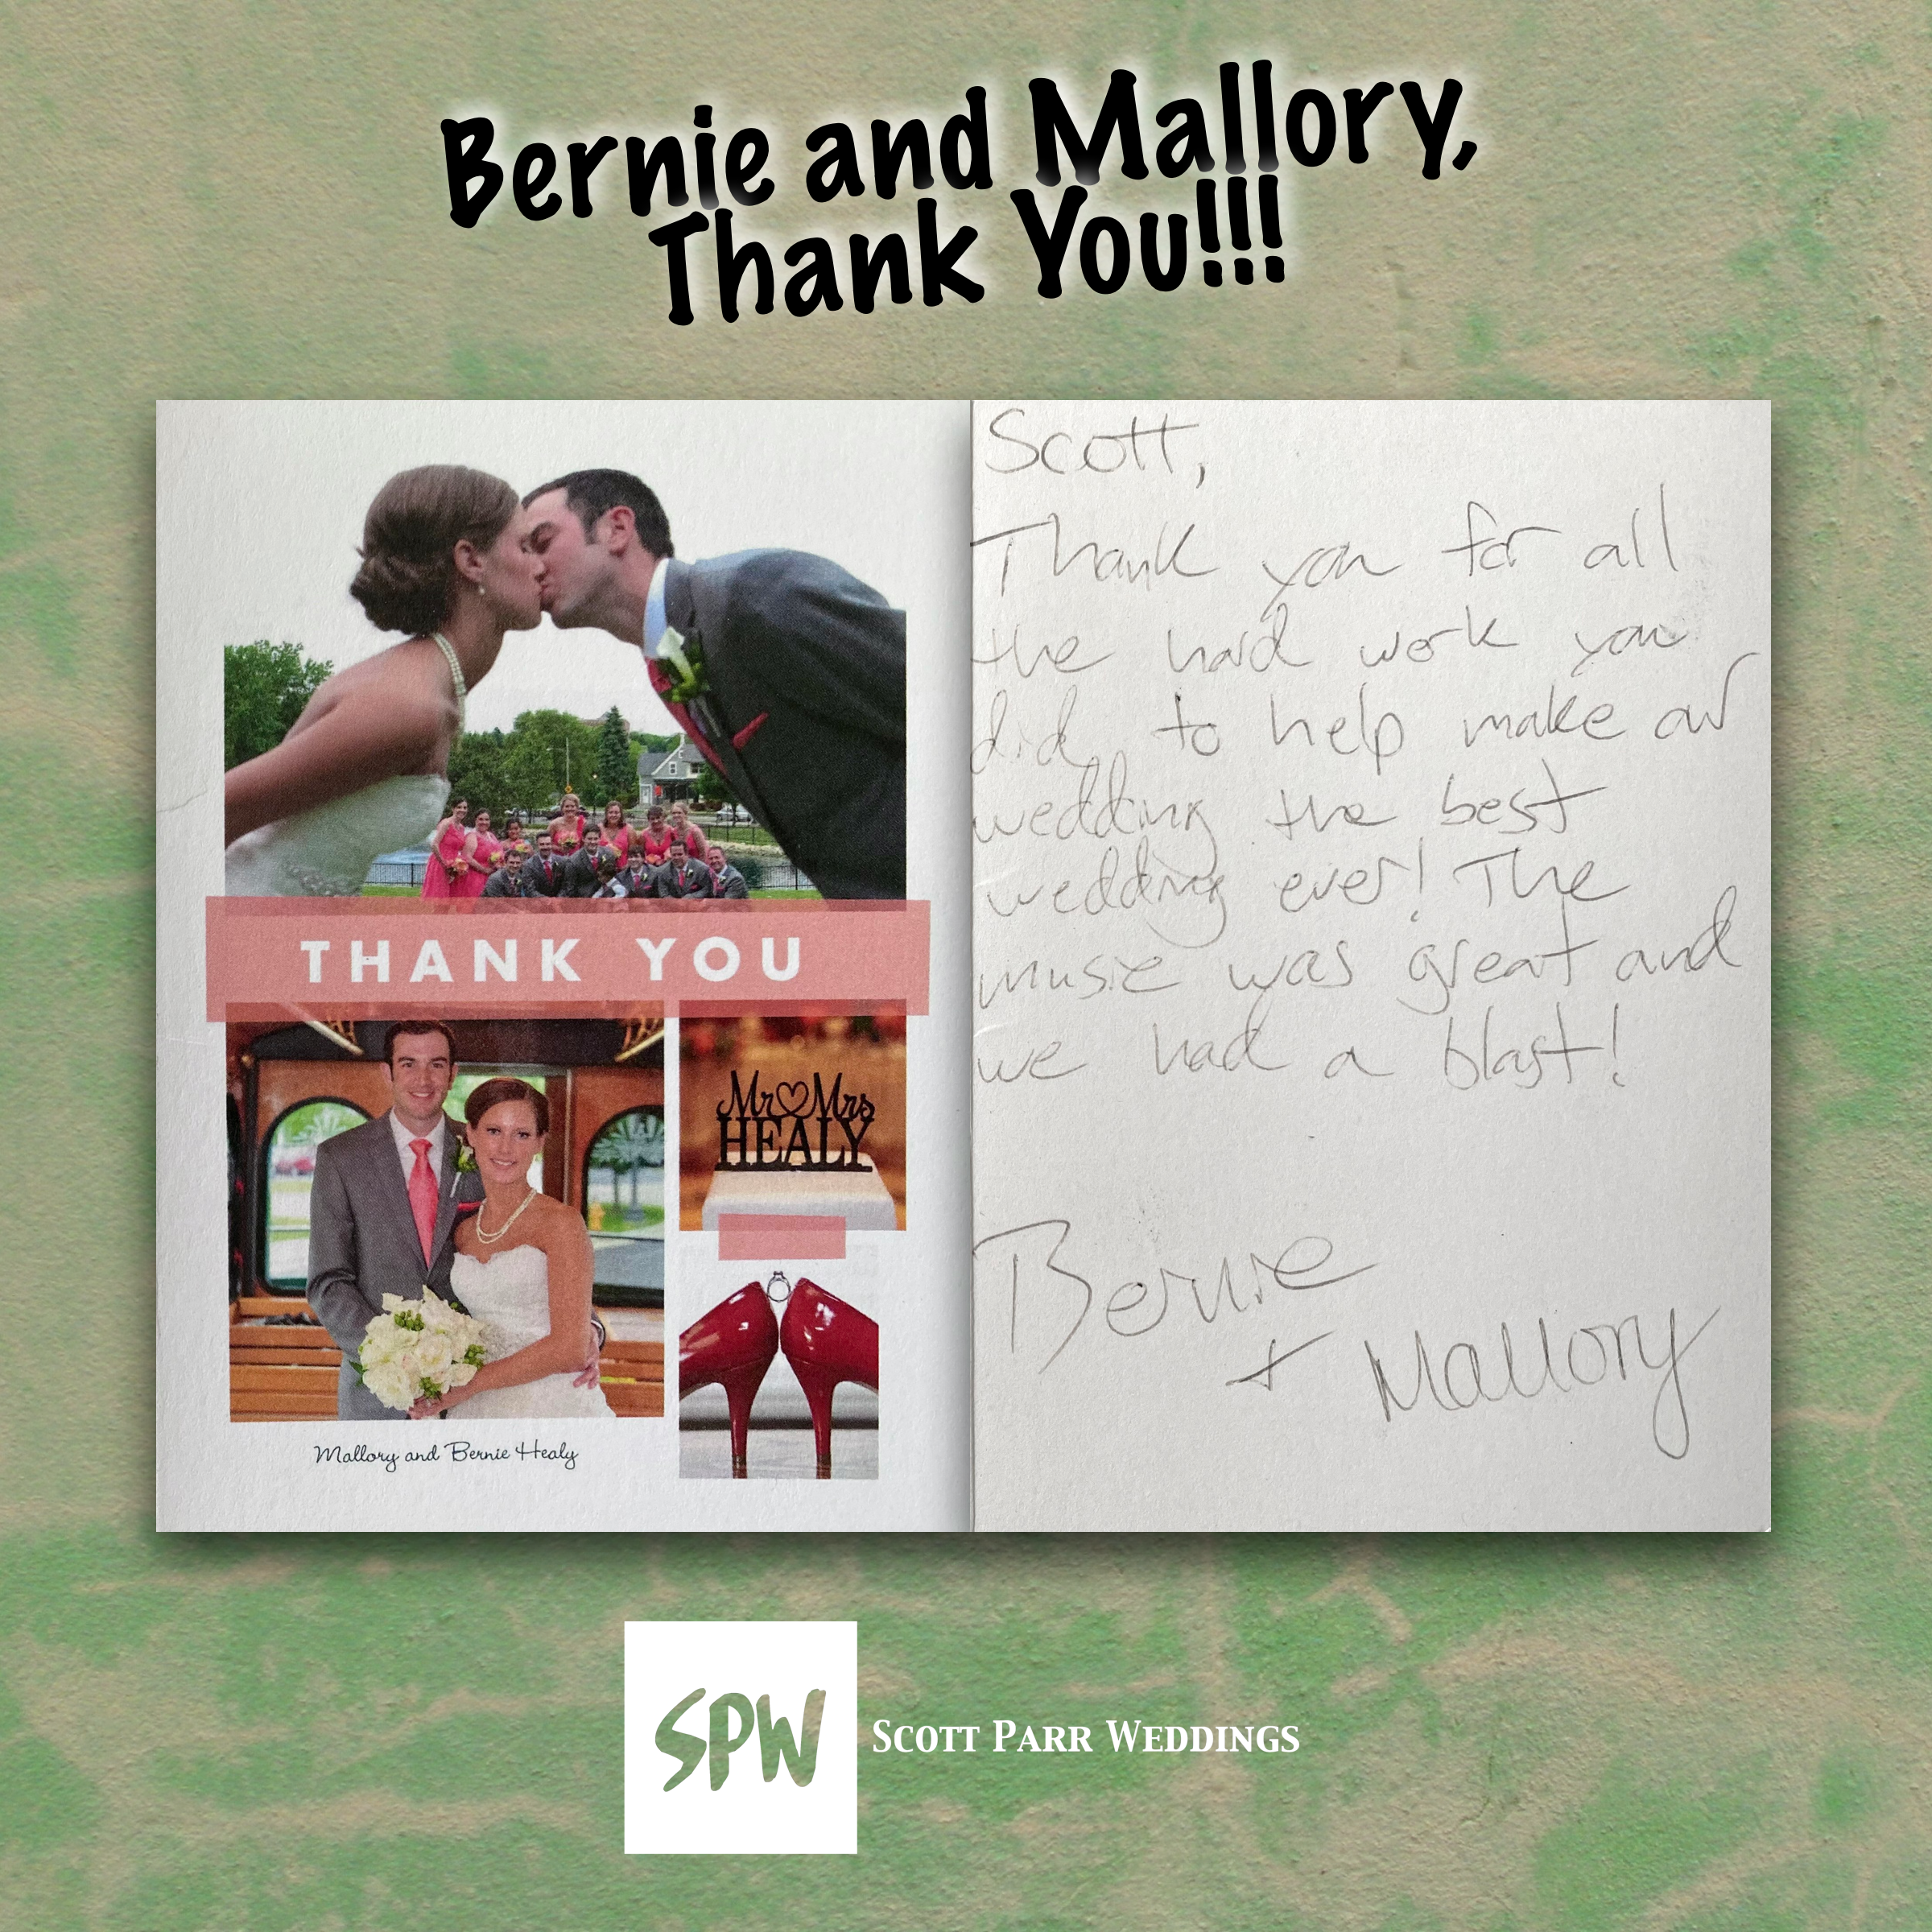 SPW - Thank You - Bernie and Mallory.png